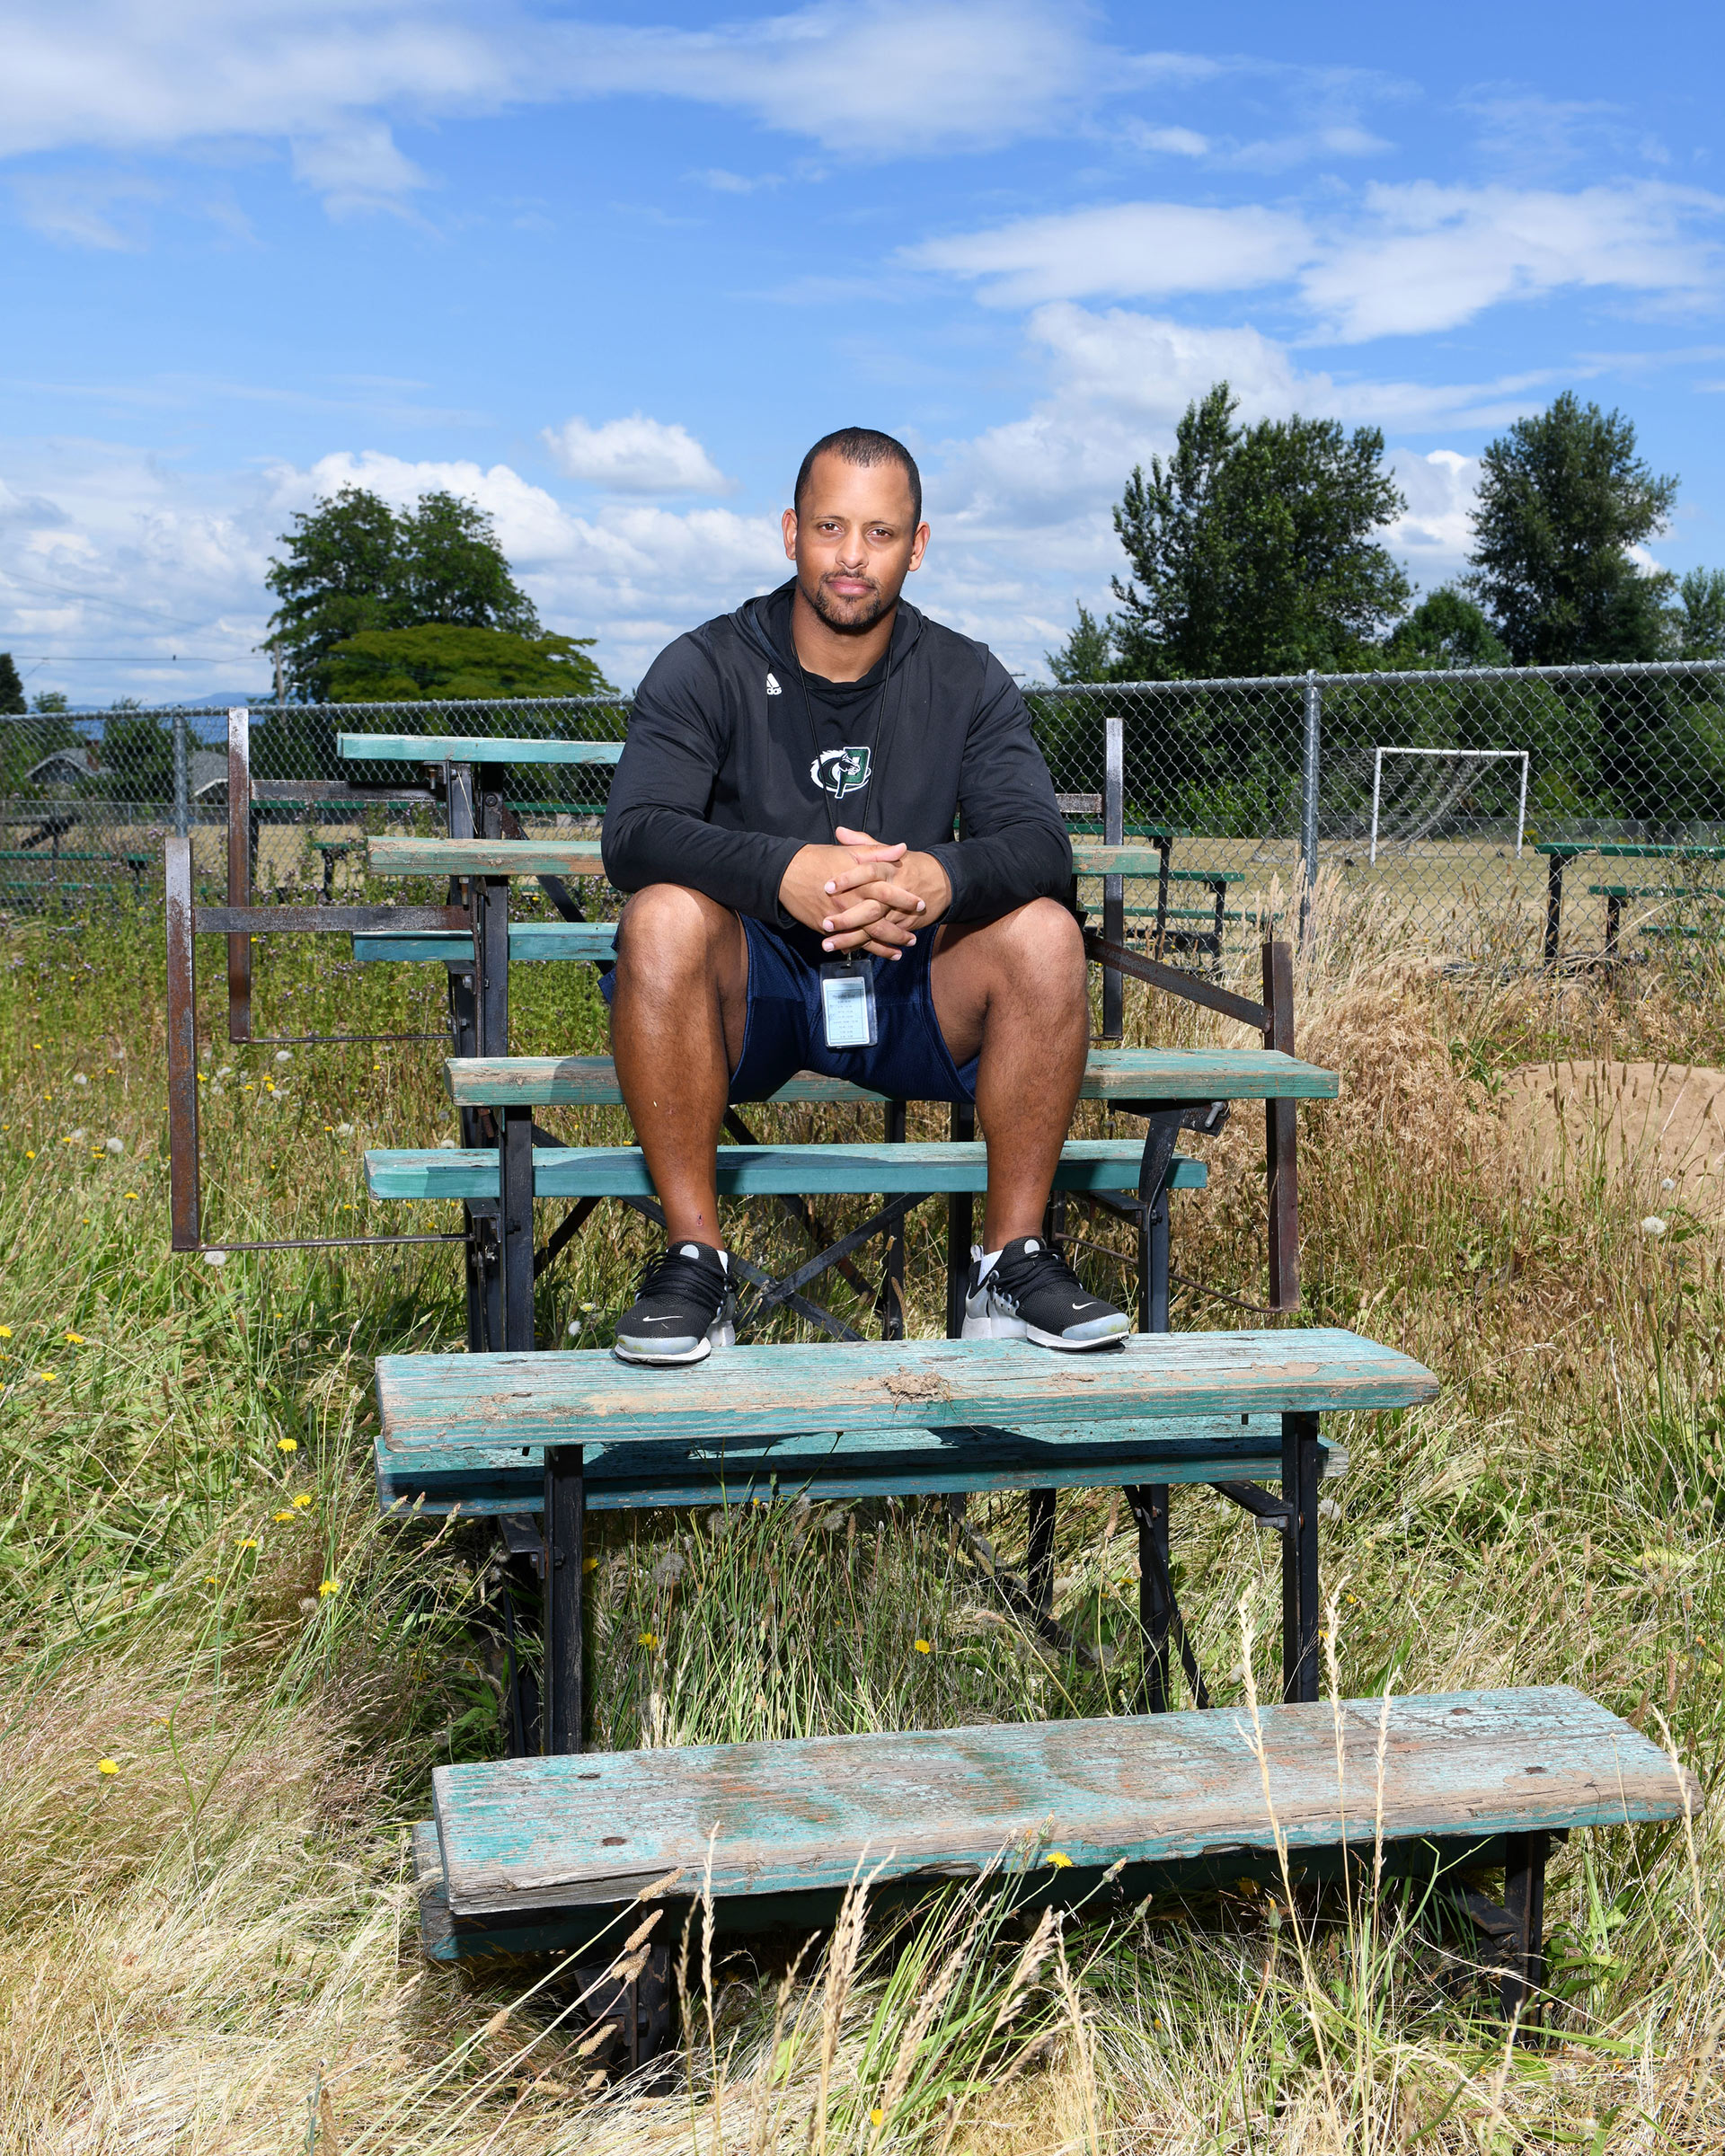 Parkrose High School football and track coach Keanon Lowe in Portland on June 25 (Jordan Murph—Sports Illustrated/Getty Images)